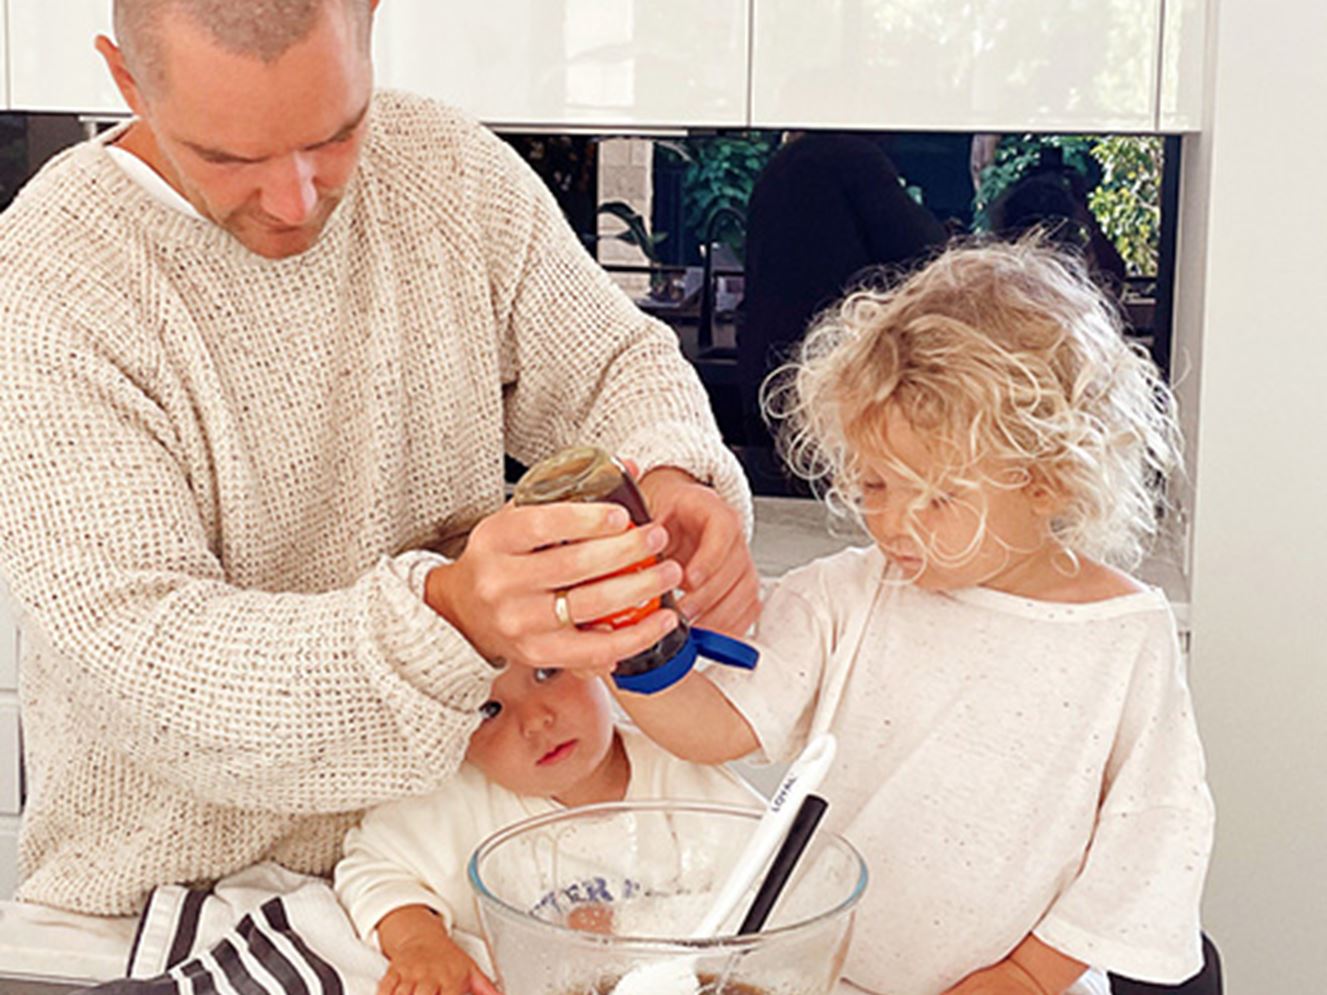 Father with two young children, baking Christmas gingerbread cookies, helps squeeze honey into a mixing bowl on a kitchen bench